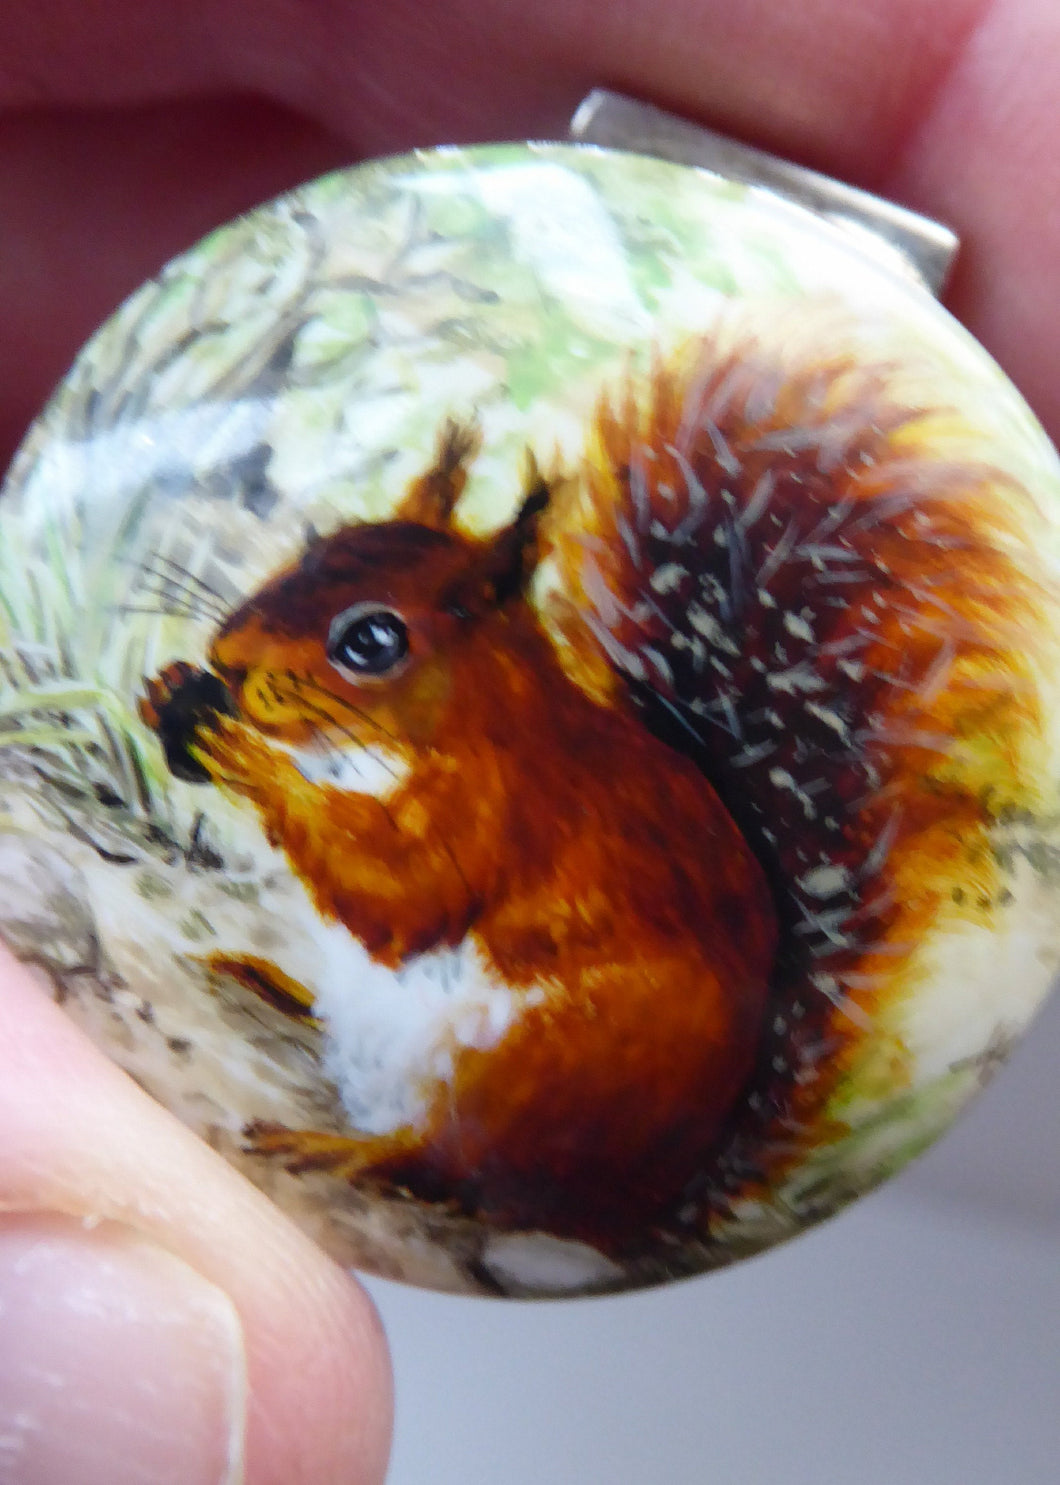 Cute Vintage Hallmarked SOLID SILVER Trinket Box. Hand-Painted Enamels on Lid  Featuring an Image of a RED Squirrel